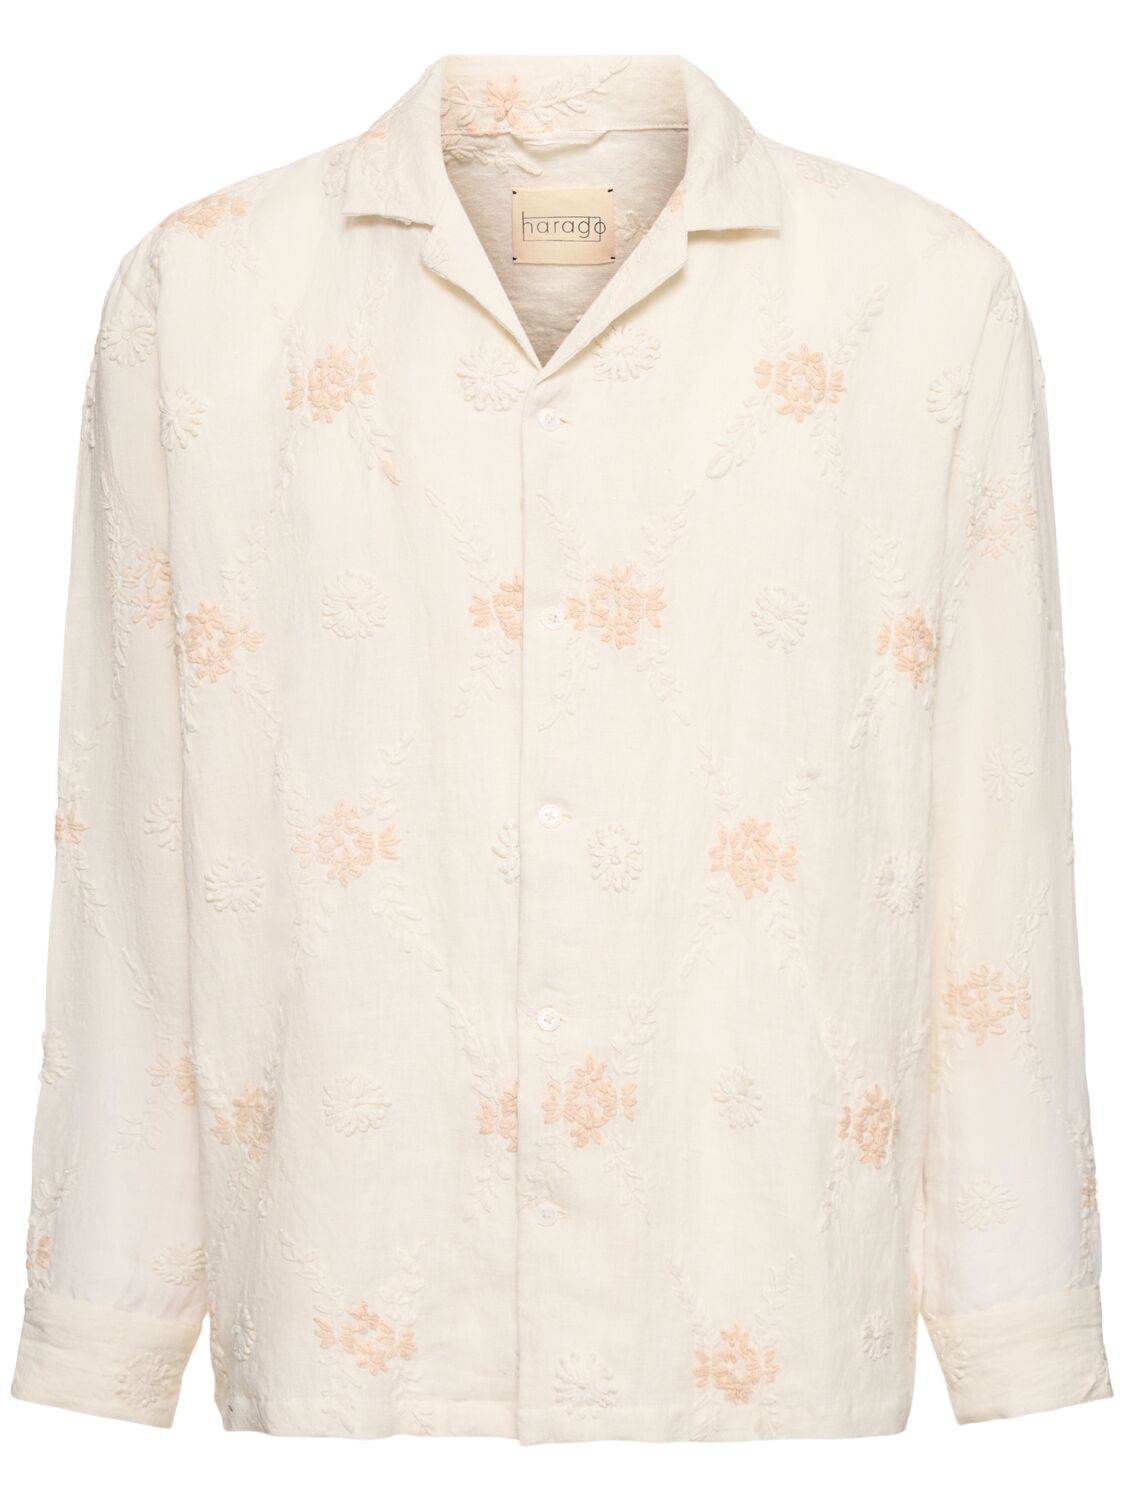 Image of Embroidered Linen Shirt